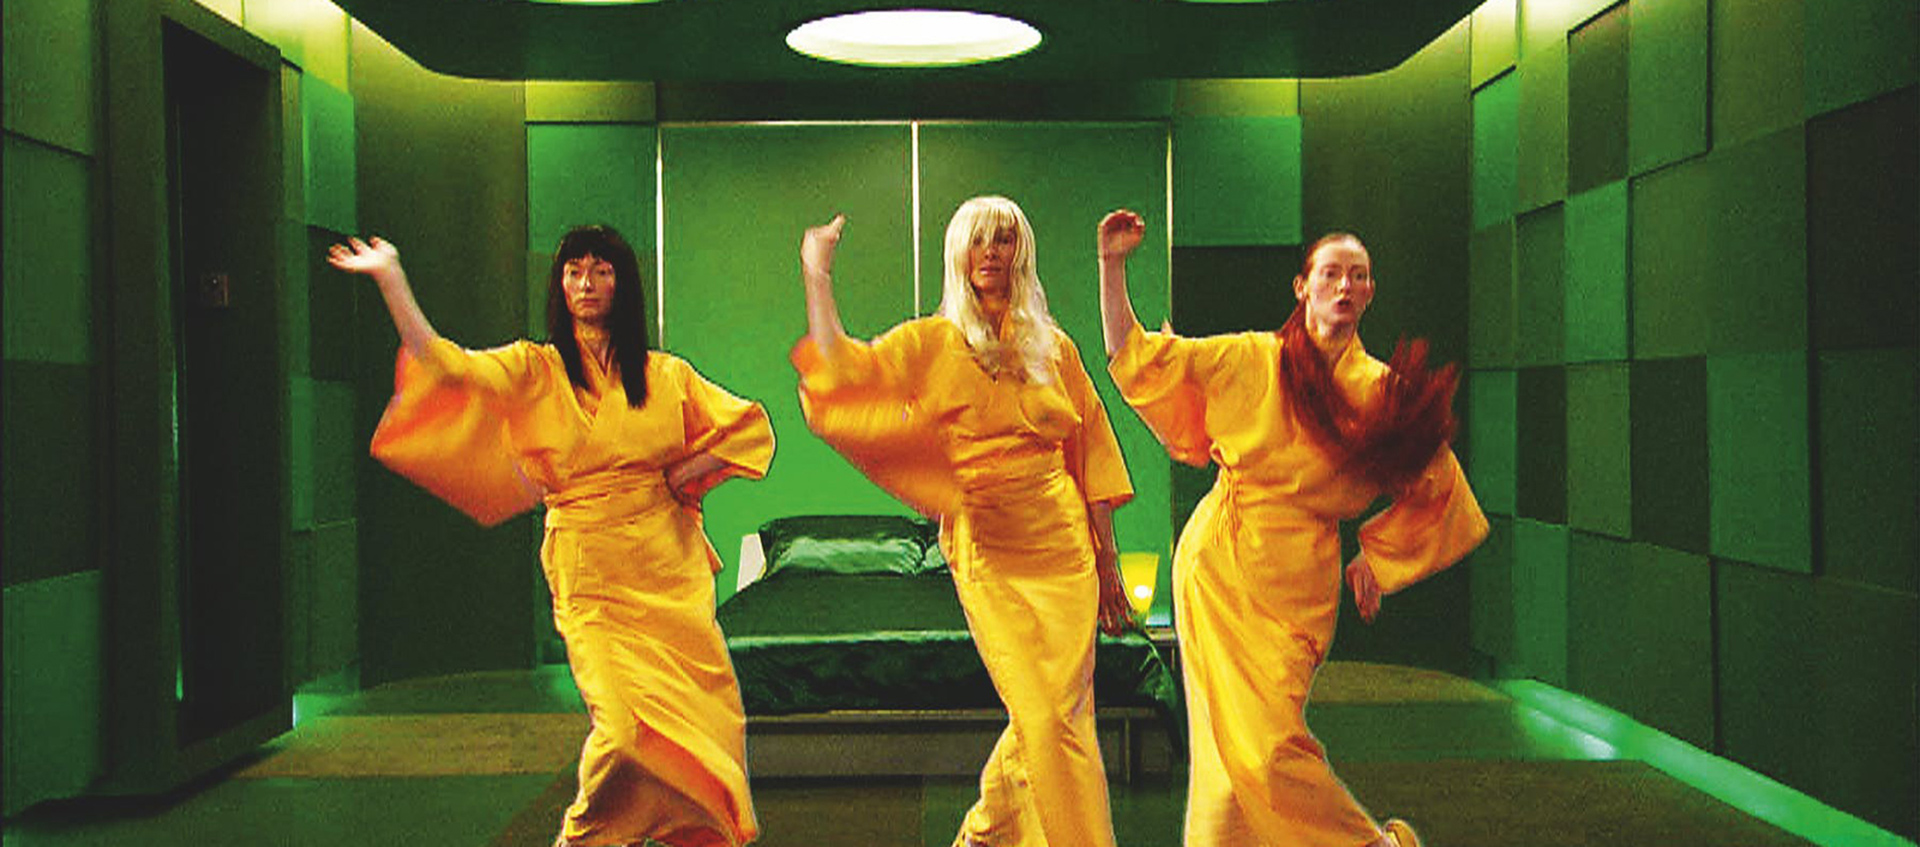 An image of three people all dressed in yellow outfits standing in an all green room. Each person has their right arm extended into the air.